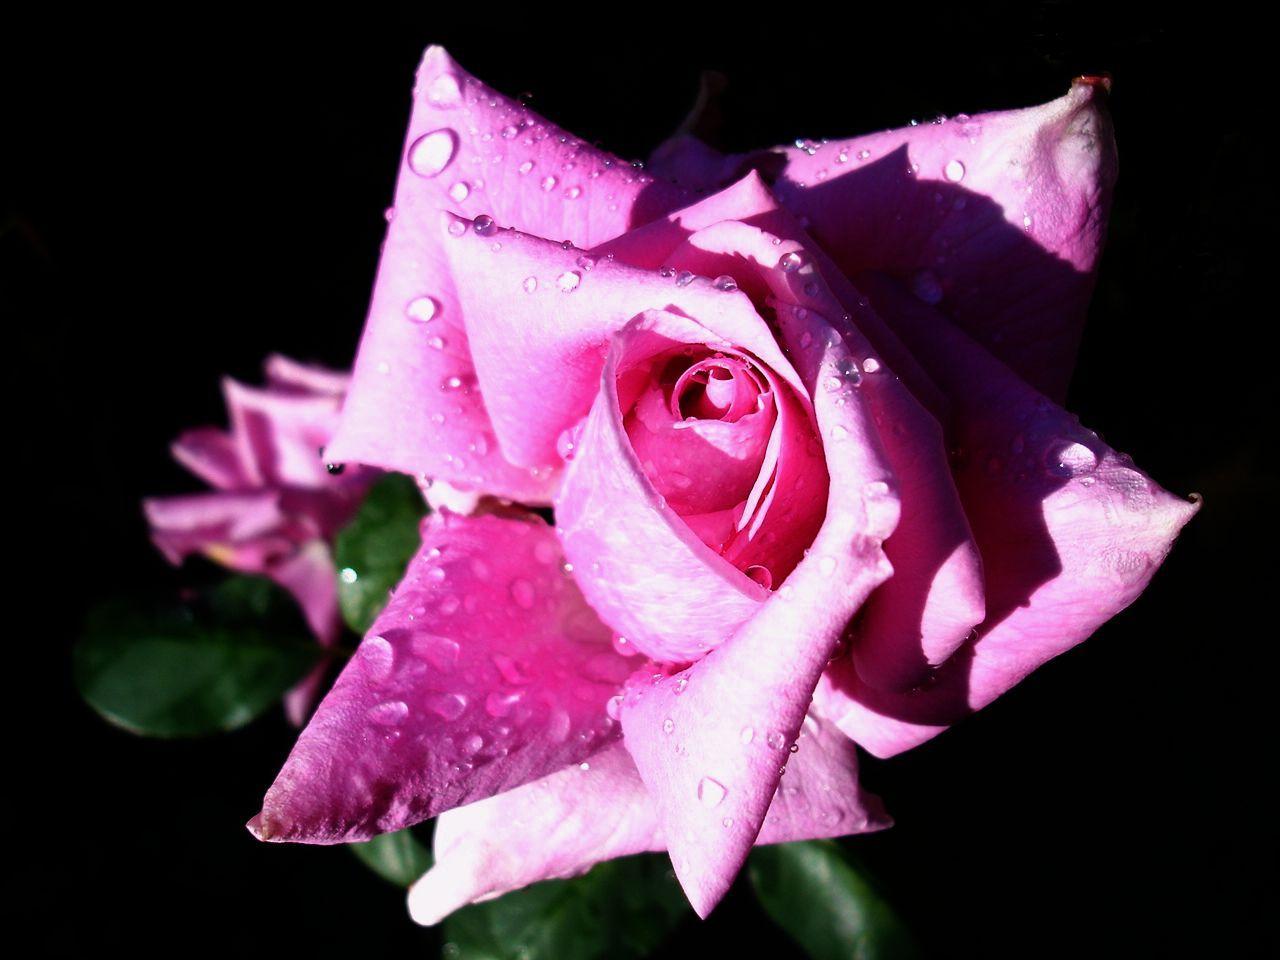 a pink rose with water drops on its petals